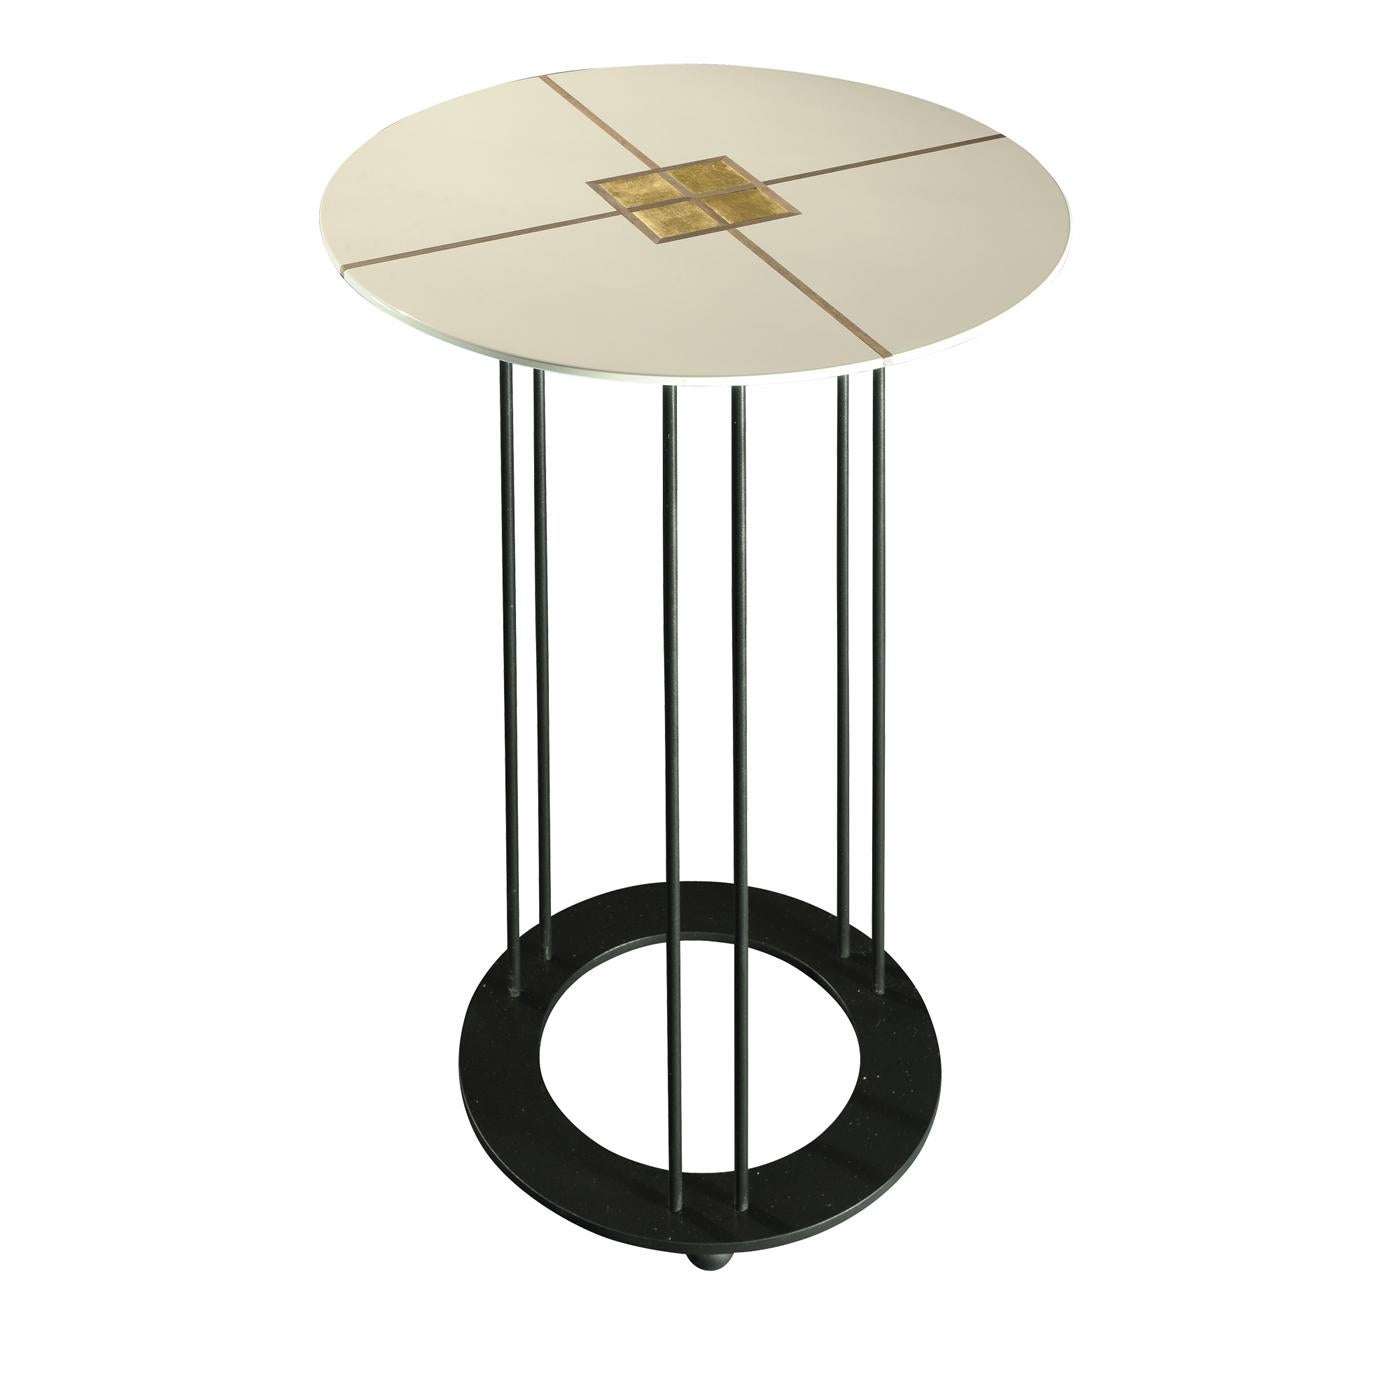 A refined piece of timeless elegance, this tall coffee table is composed of a matte black-coated metal structure marked by three pairs of long, slim legs attached to a ring-shaped base that adds firm balance to the piece. The top is fashioned of